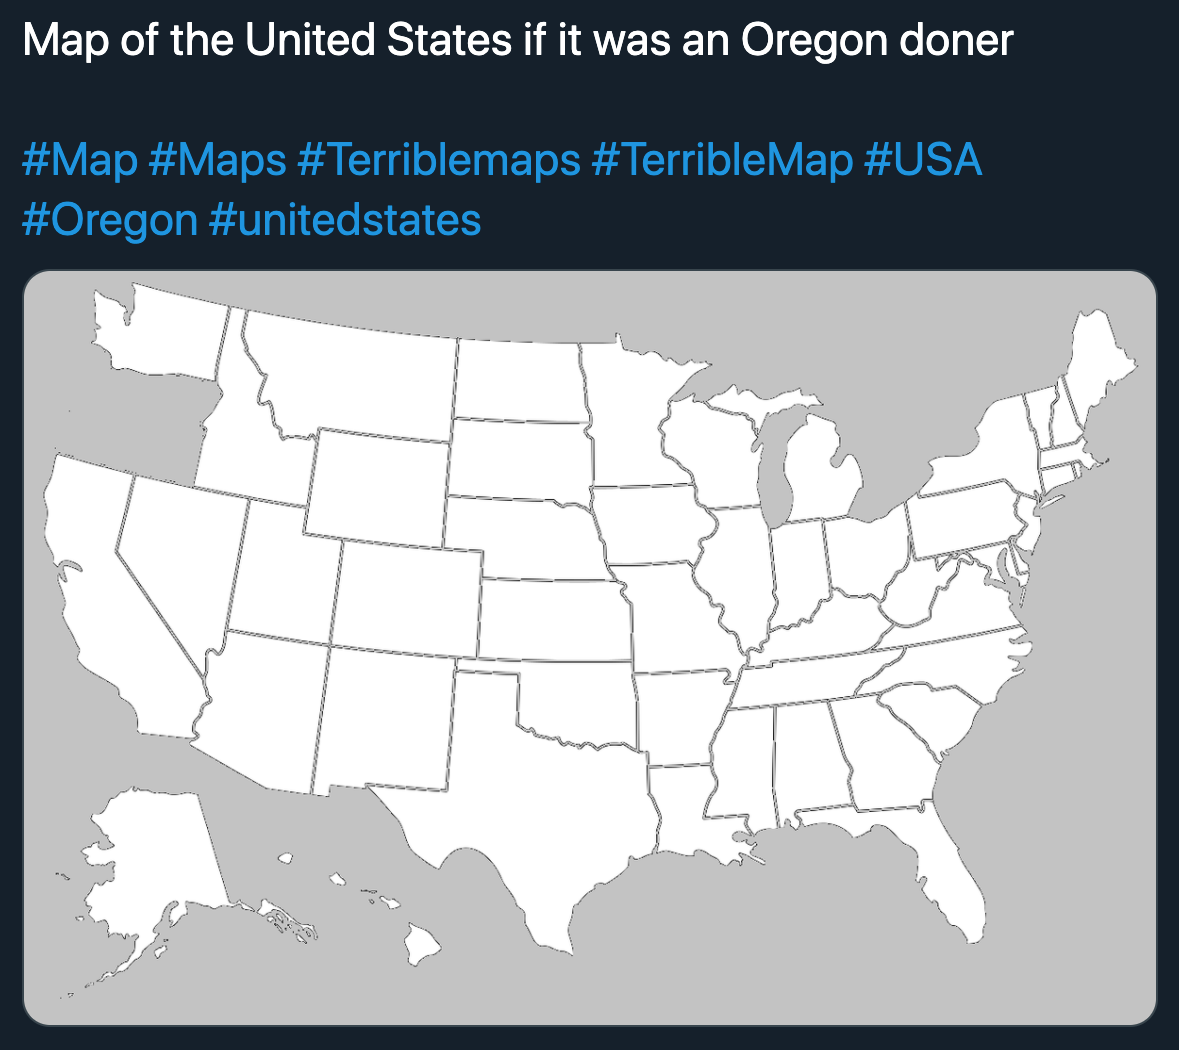 terrible map jokes - map of the united states if it was an oregon donor